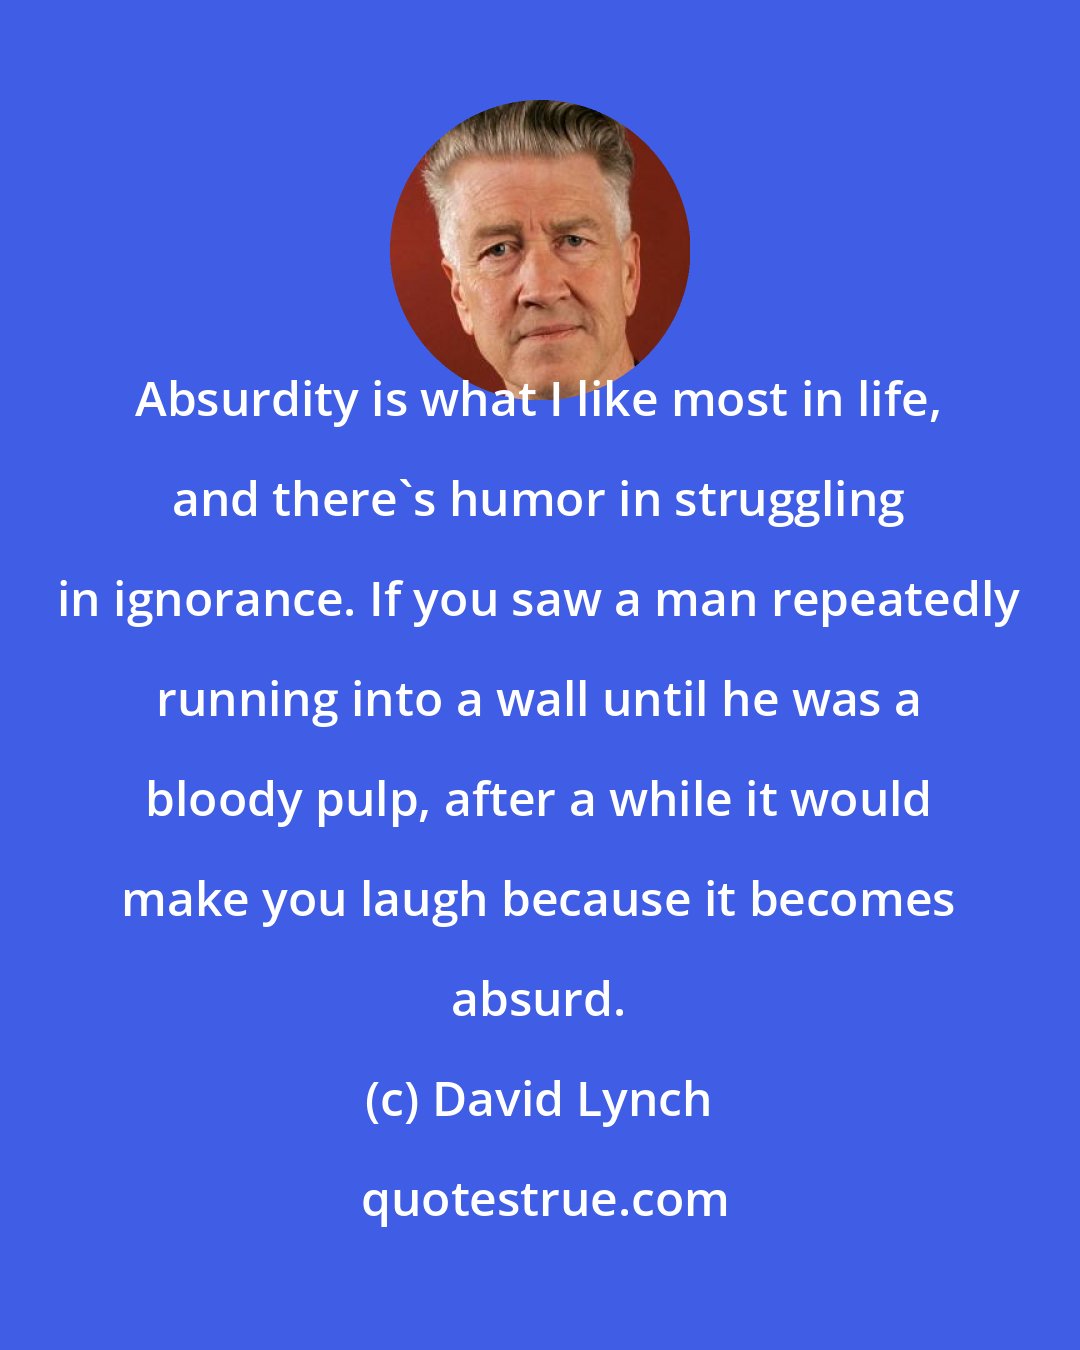 David Lynch: Absurdity is what I like most in life, and there's humor in struggling in ignorance. If you saw a man repeatedly running into a wall until he was a bloody pulp, after a while it would make you laugh because it becomes absurd.